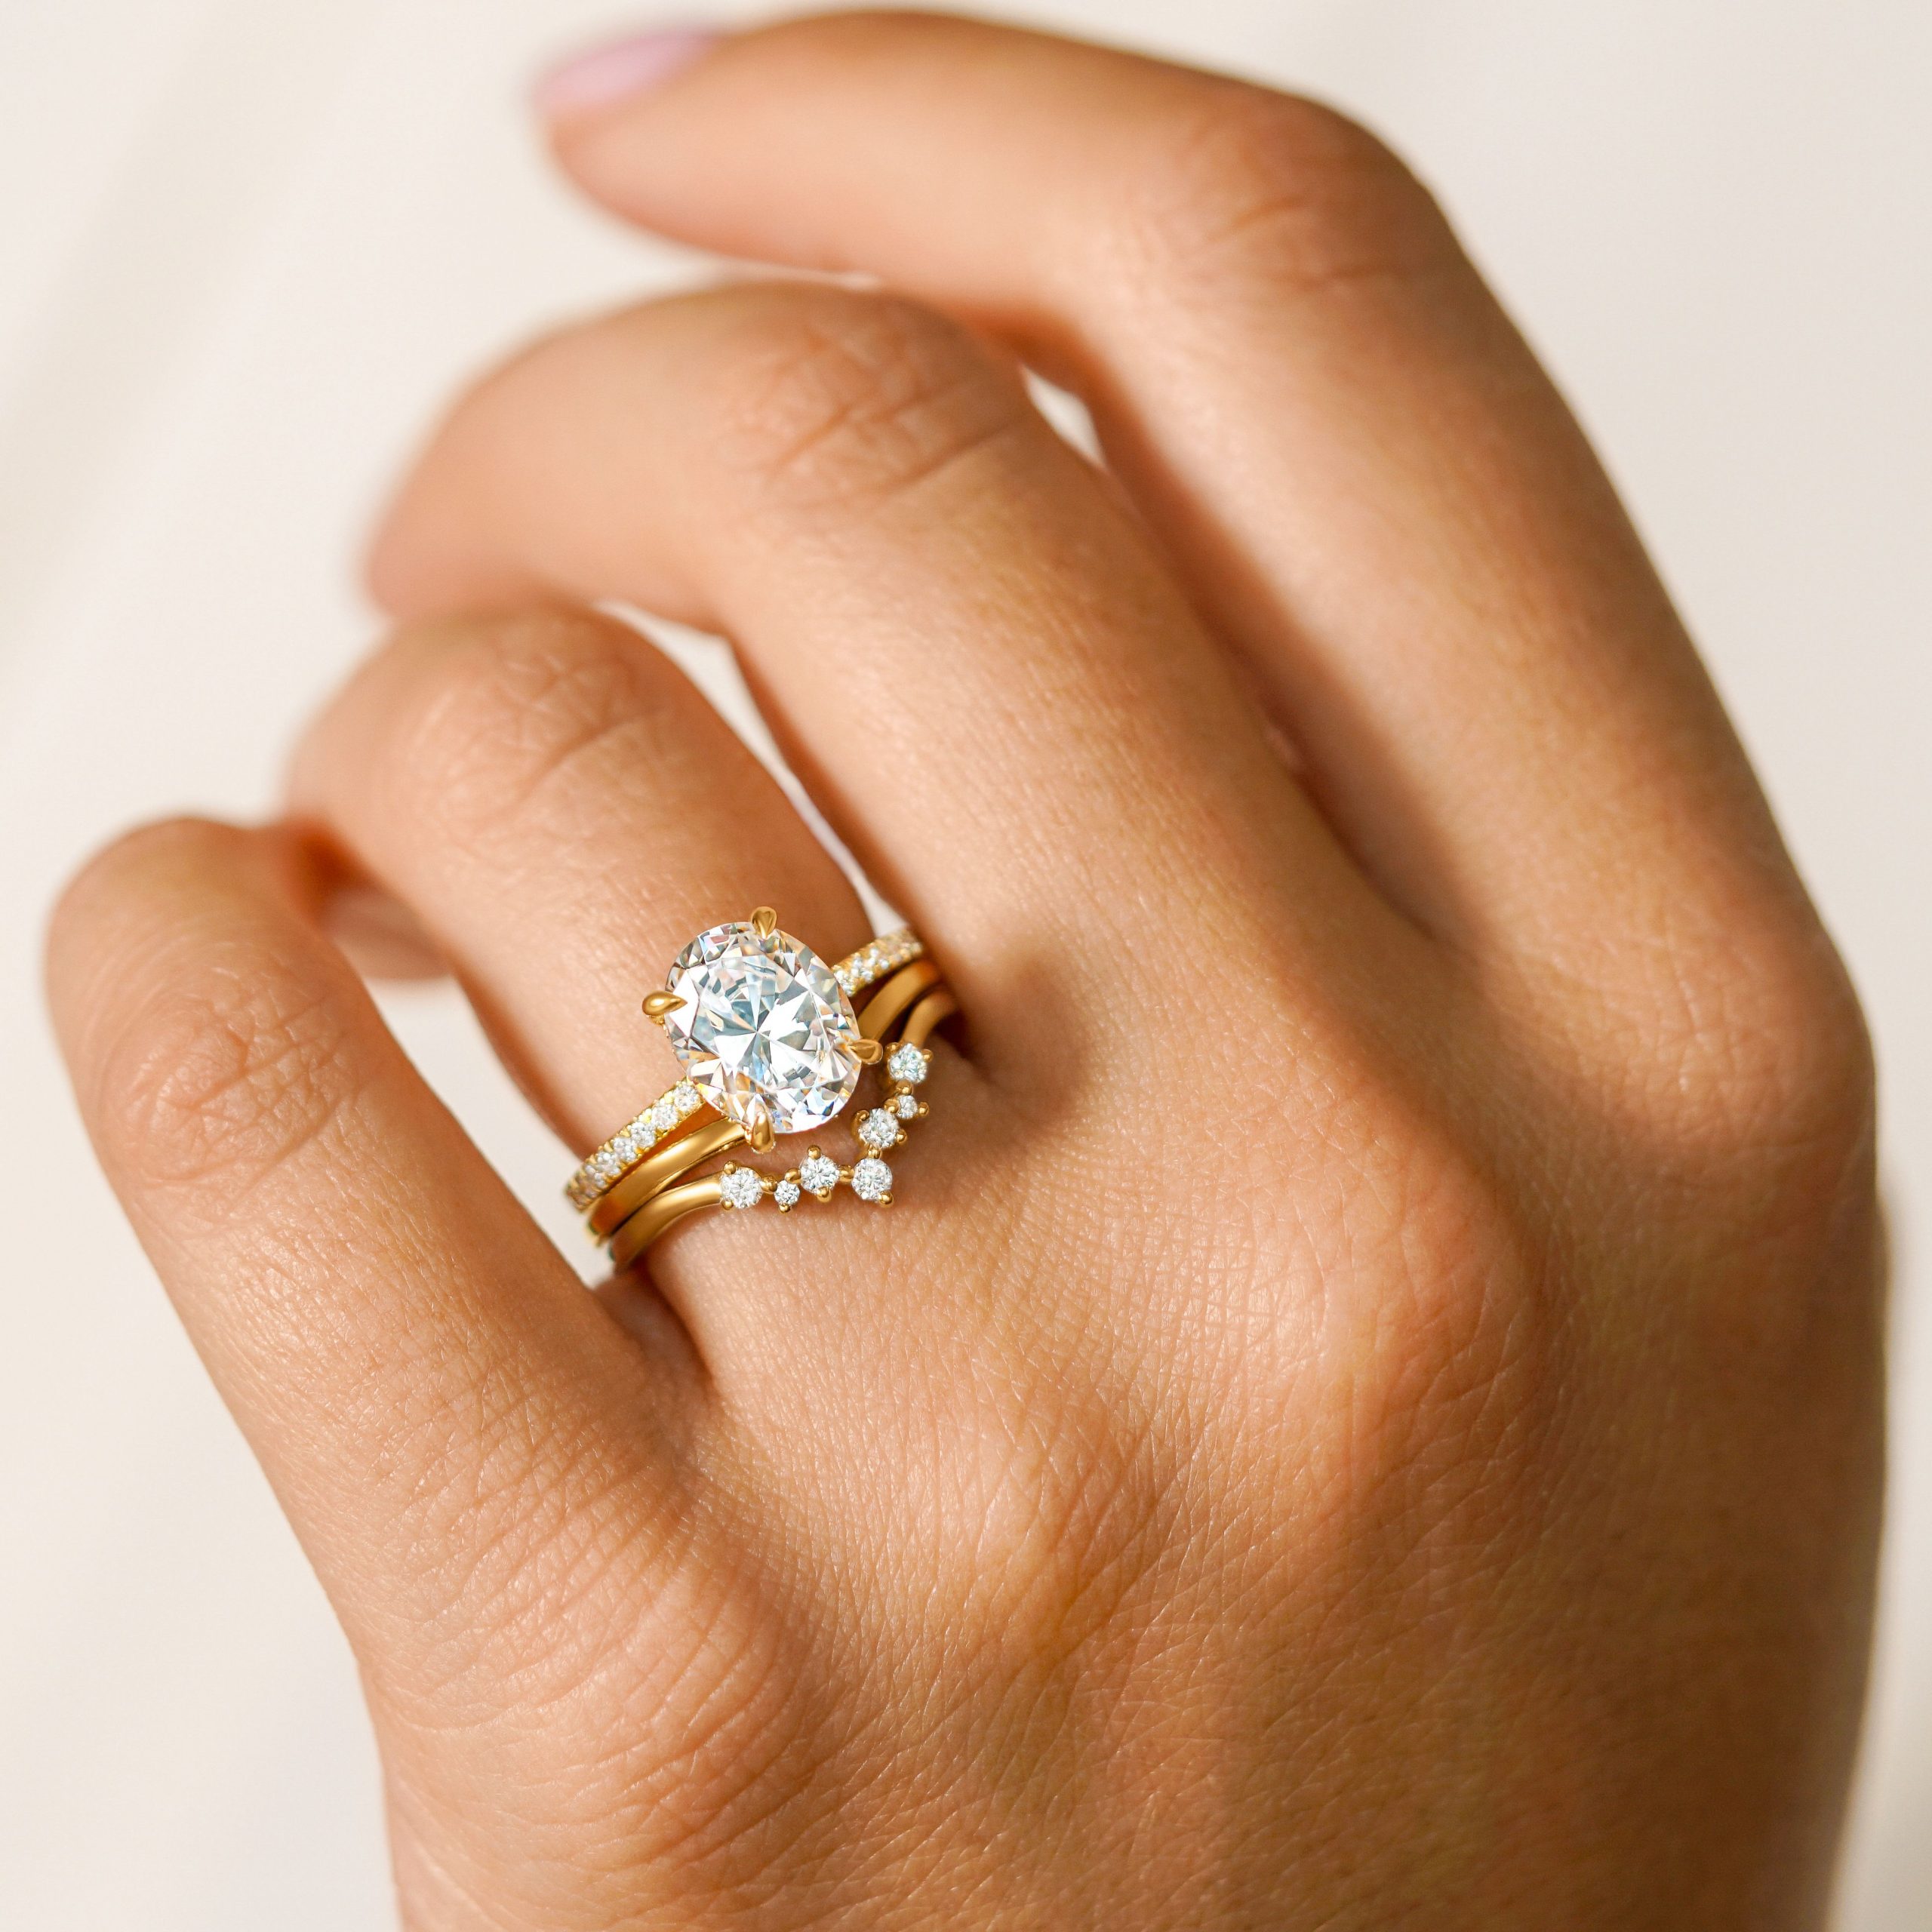 12 Stacked Wedding Ring Ideas to Complete Your Bridal Look